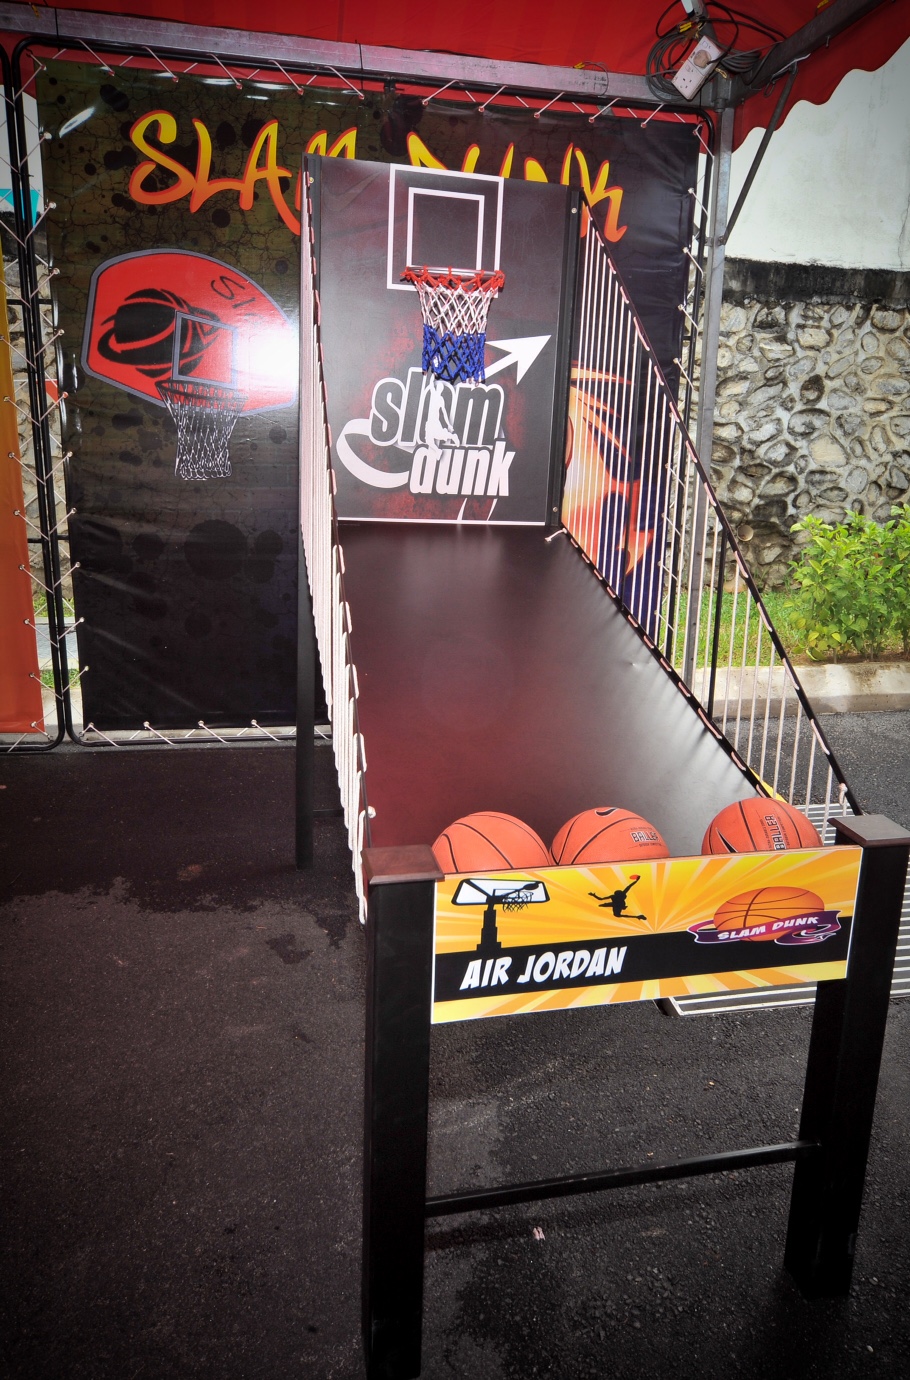 Players can 'Slam Dunk' their way to exciting prizes at eCurve!